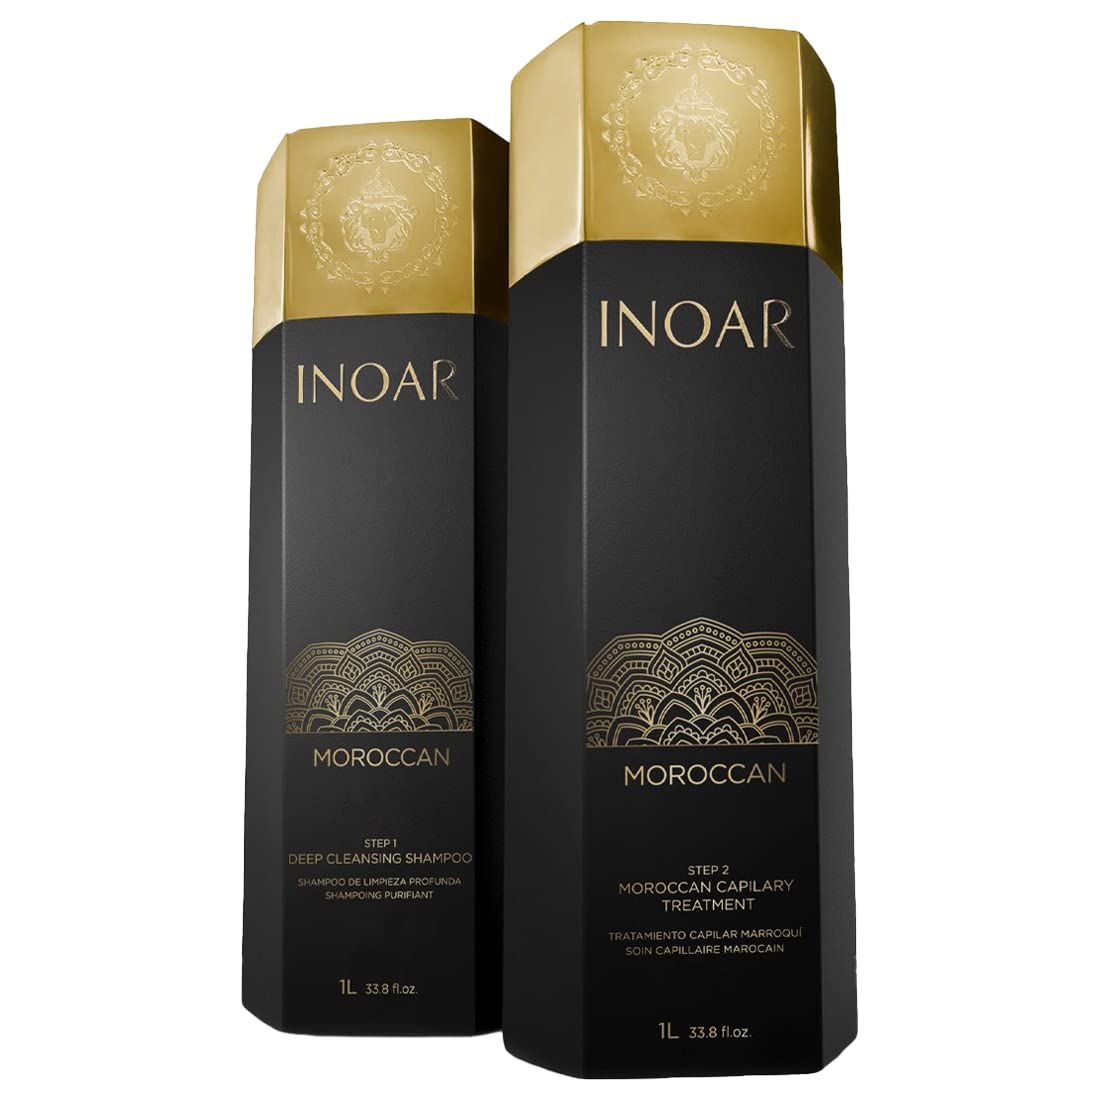 INOAR – Moroccan Smoothing Treatment Set with Keratin - Deep Cleansing Shampoo & Keratin Treatment, Curly Hair Care, Vegan Hair Product, Cruelty Free Haircare for Men and Women (33.8 oz. Each)